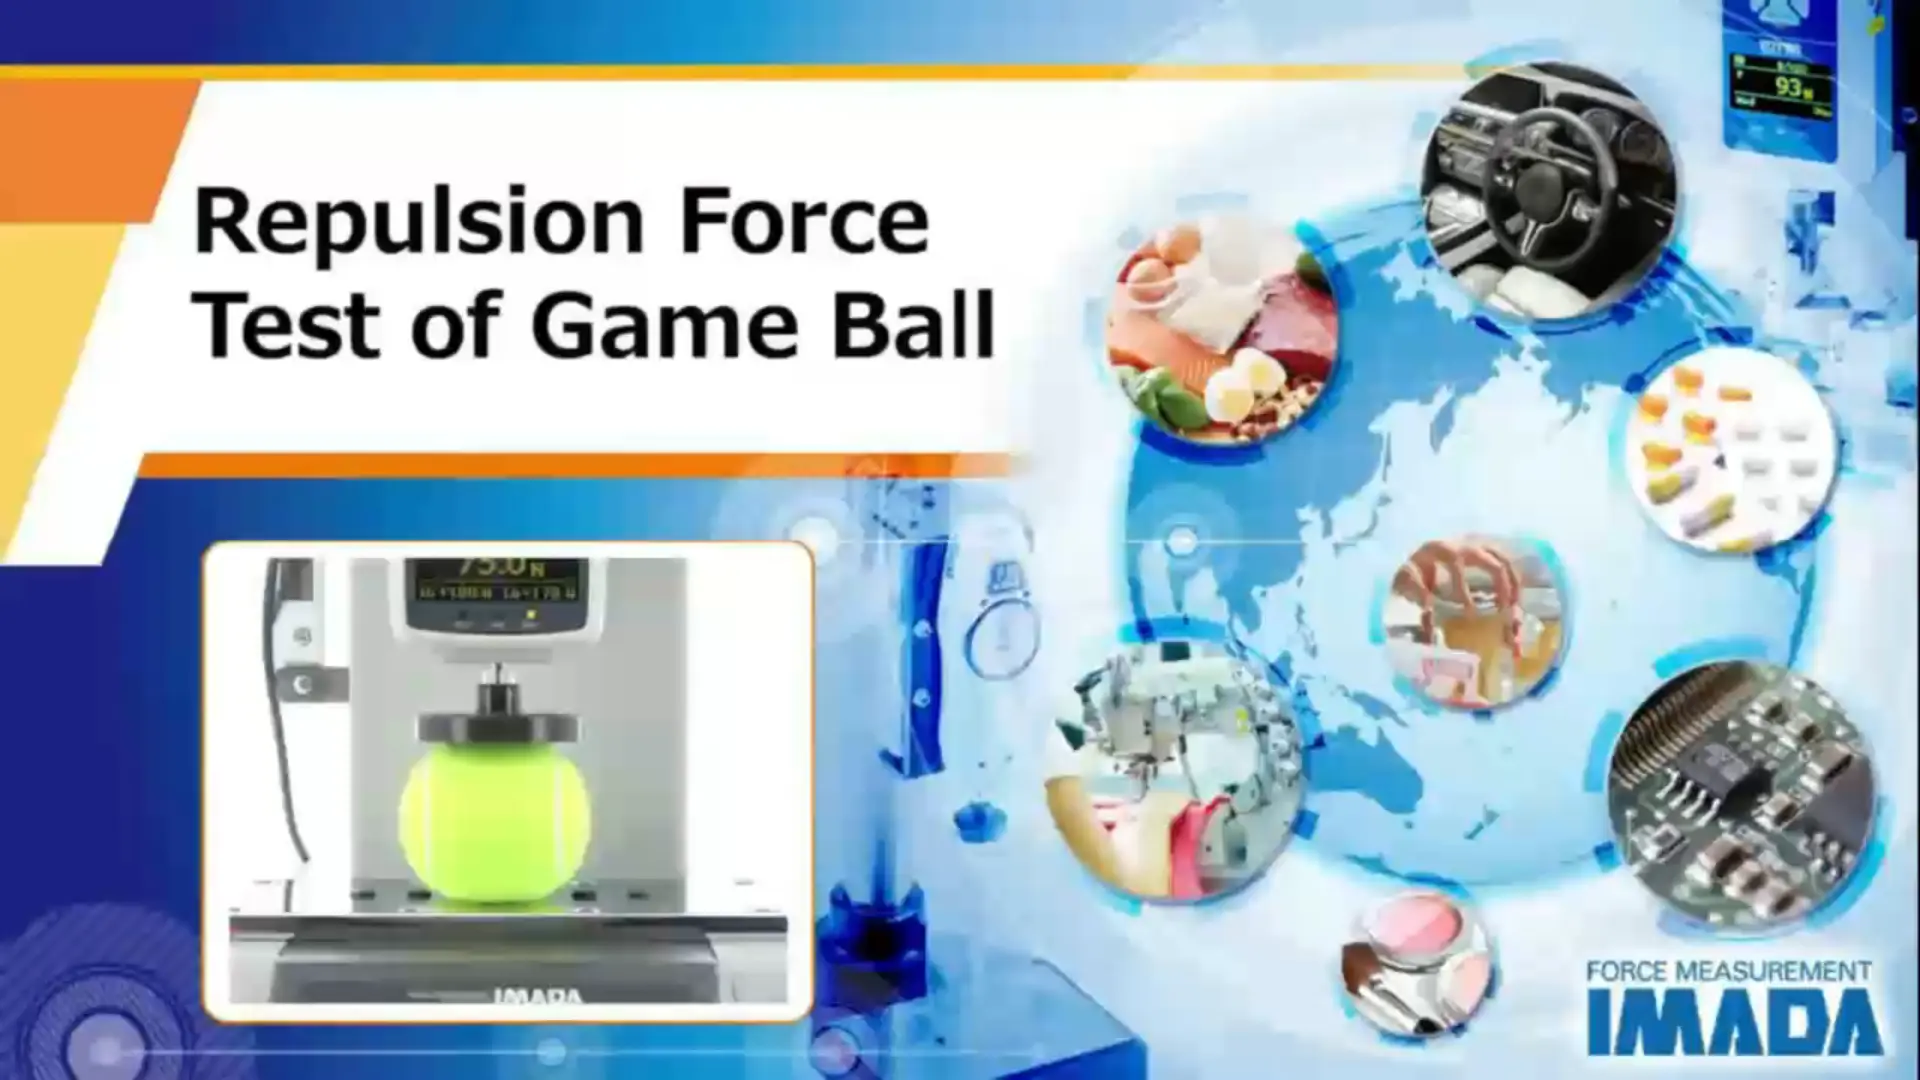 Repulsion Force Test of Game Ball